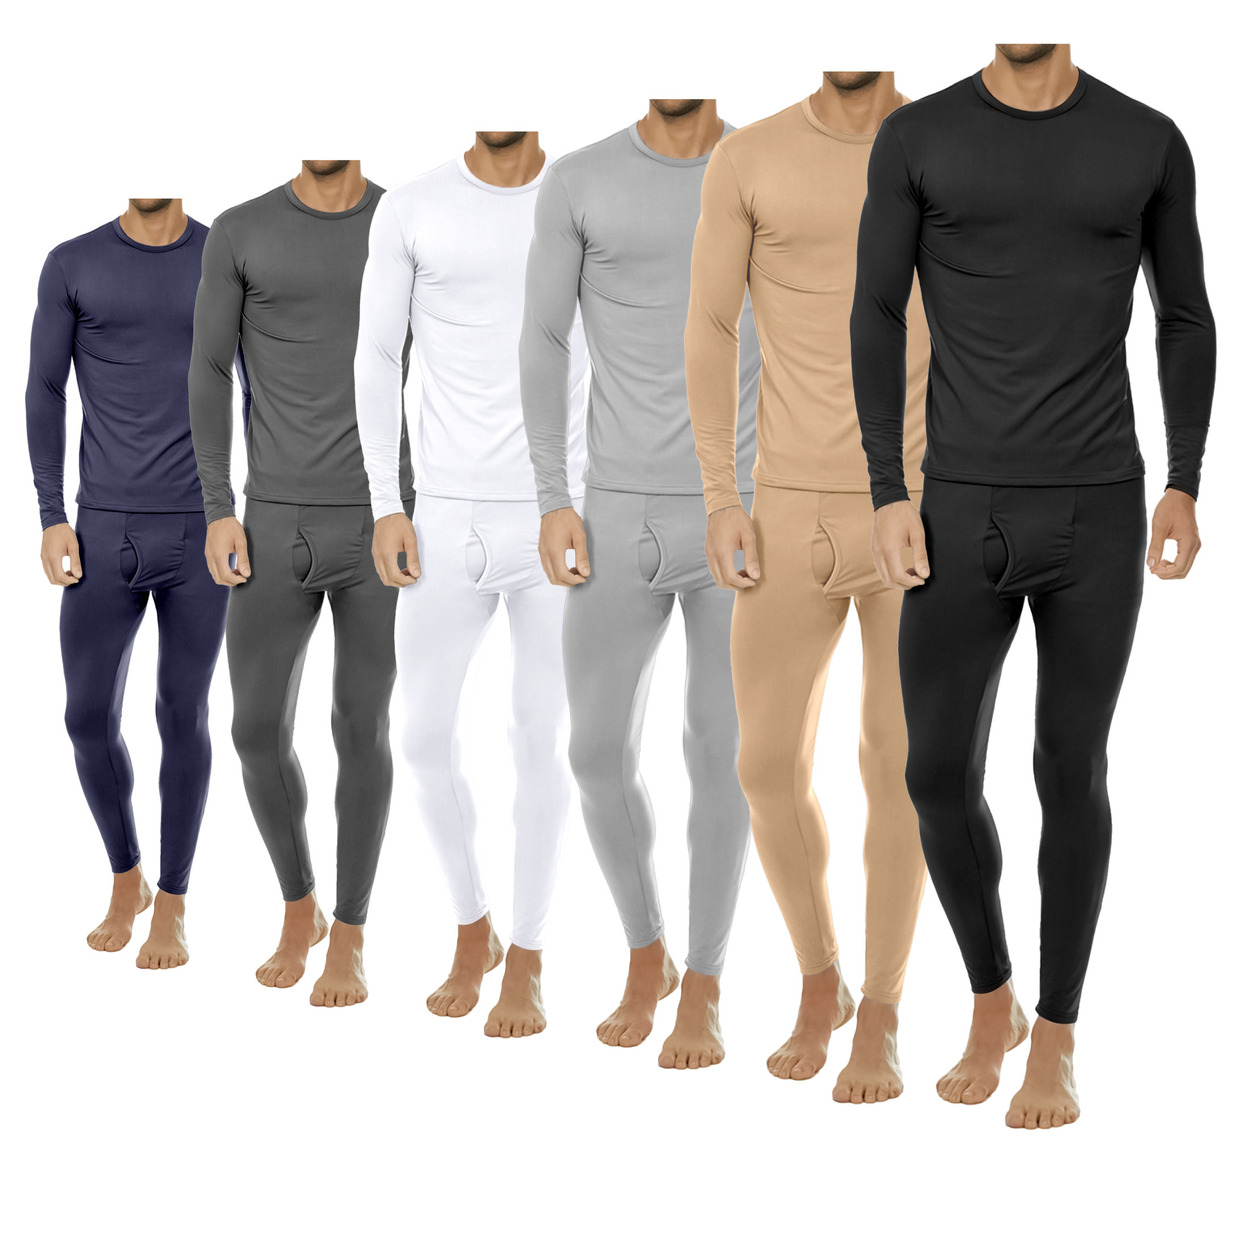 2-Pieces: Men's Winter Warm Fleece Lined Thermal Underwear Set For Cold Weather - Black, Large